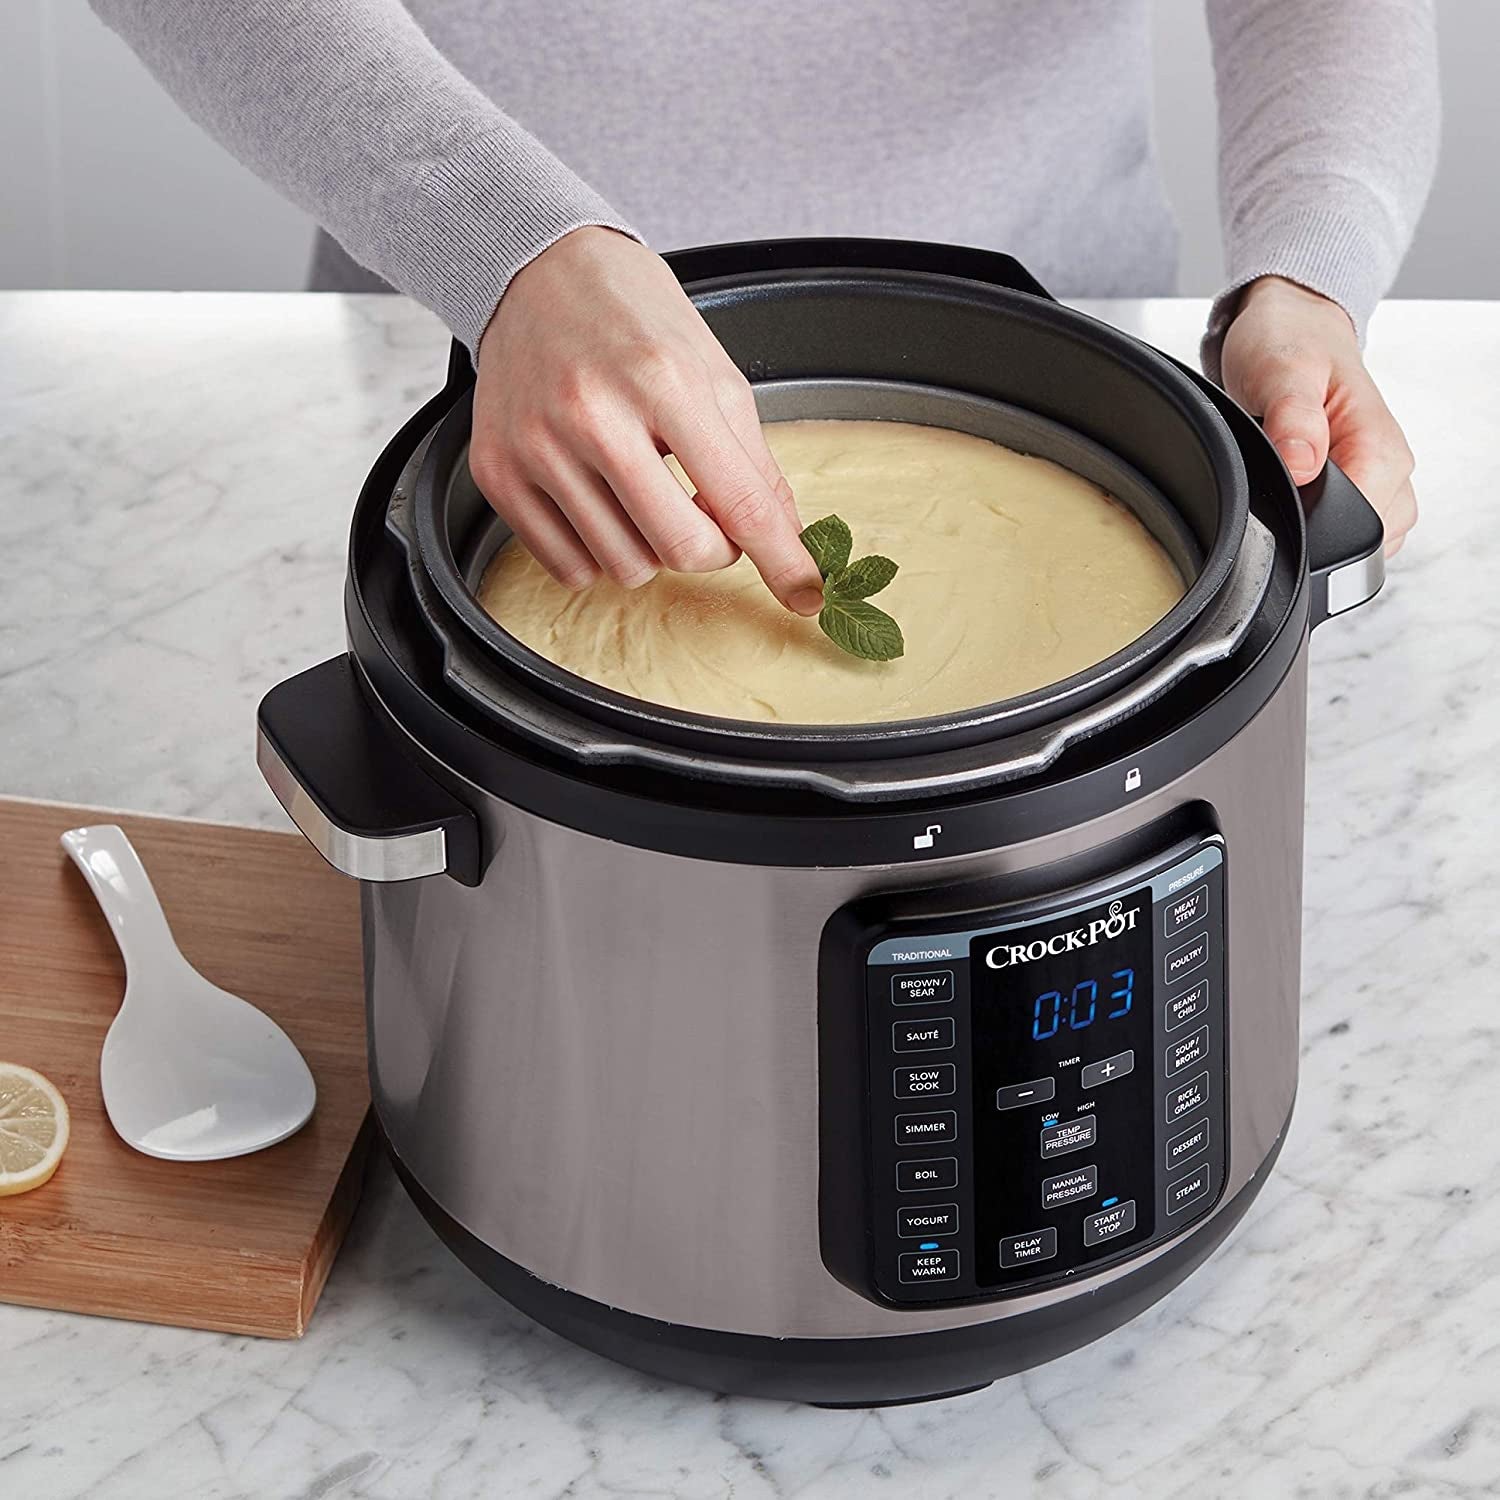 Crockpot Brand Insulated Carry Case with Handles for Slow Cooker. 15 NEW